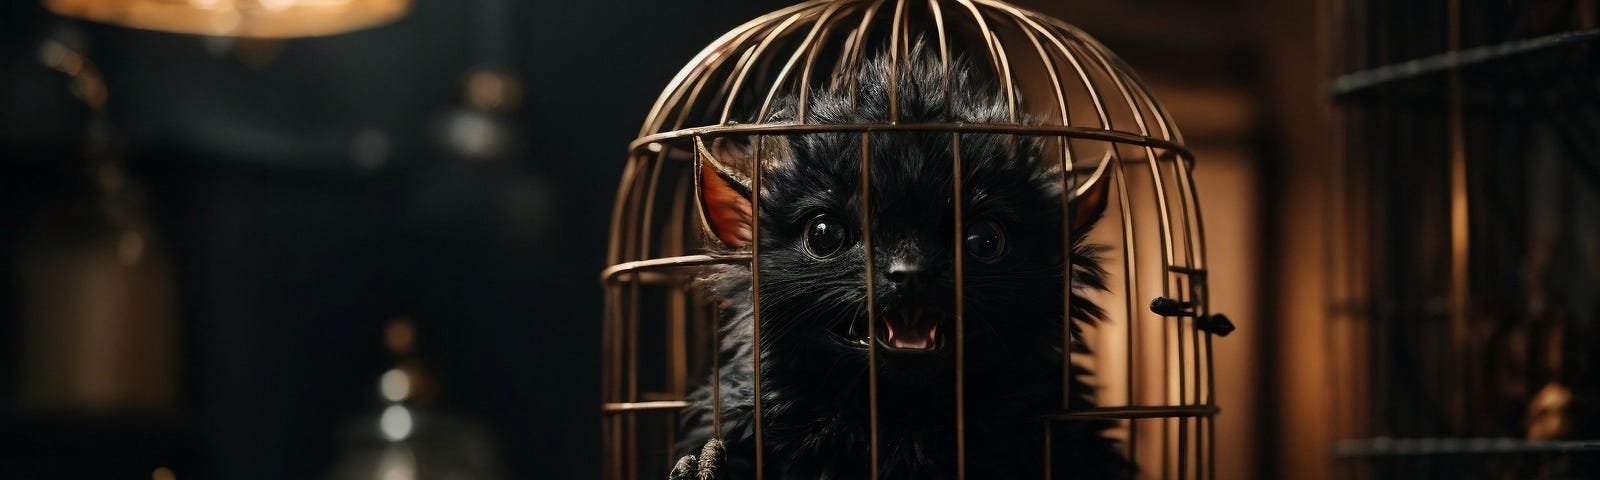 Baby demon in a cage